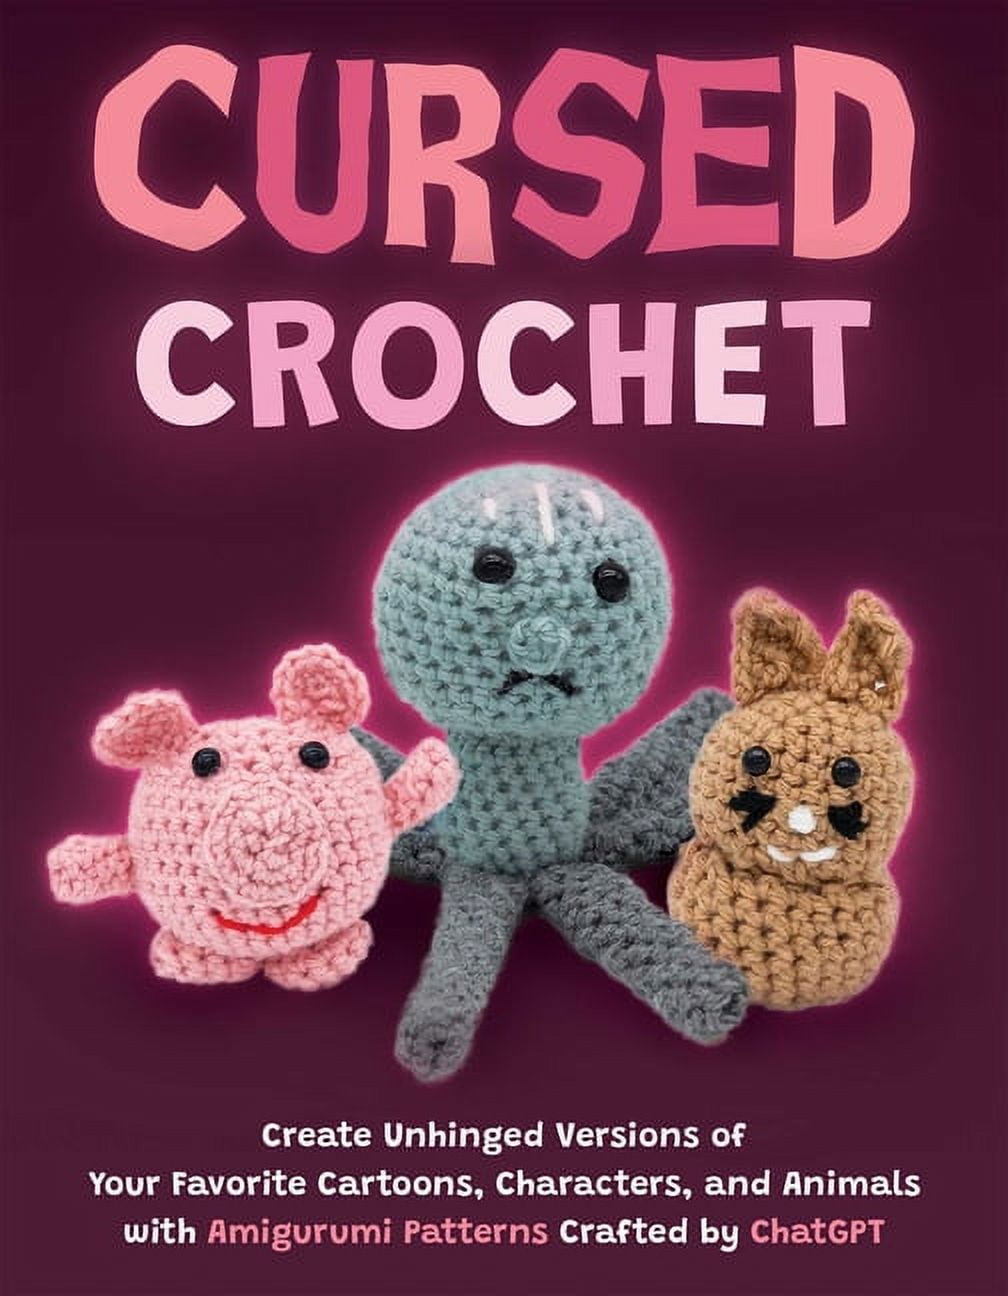 Cursed Crochet: Create Unhinged Versions of Your Favorite Cartoons, Characters, and Animals with Amigurumi Patterns Crafted by ChatGPT [Book]